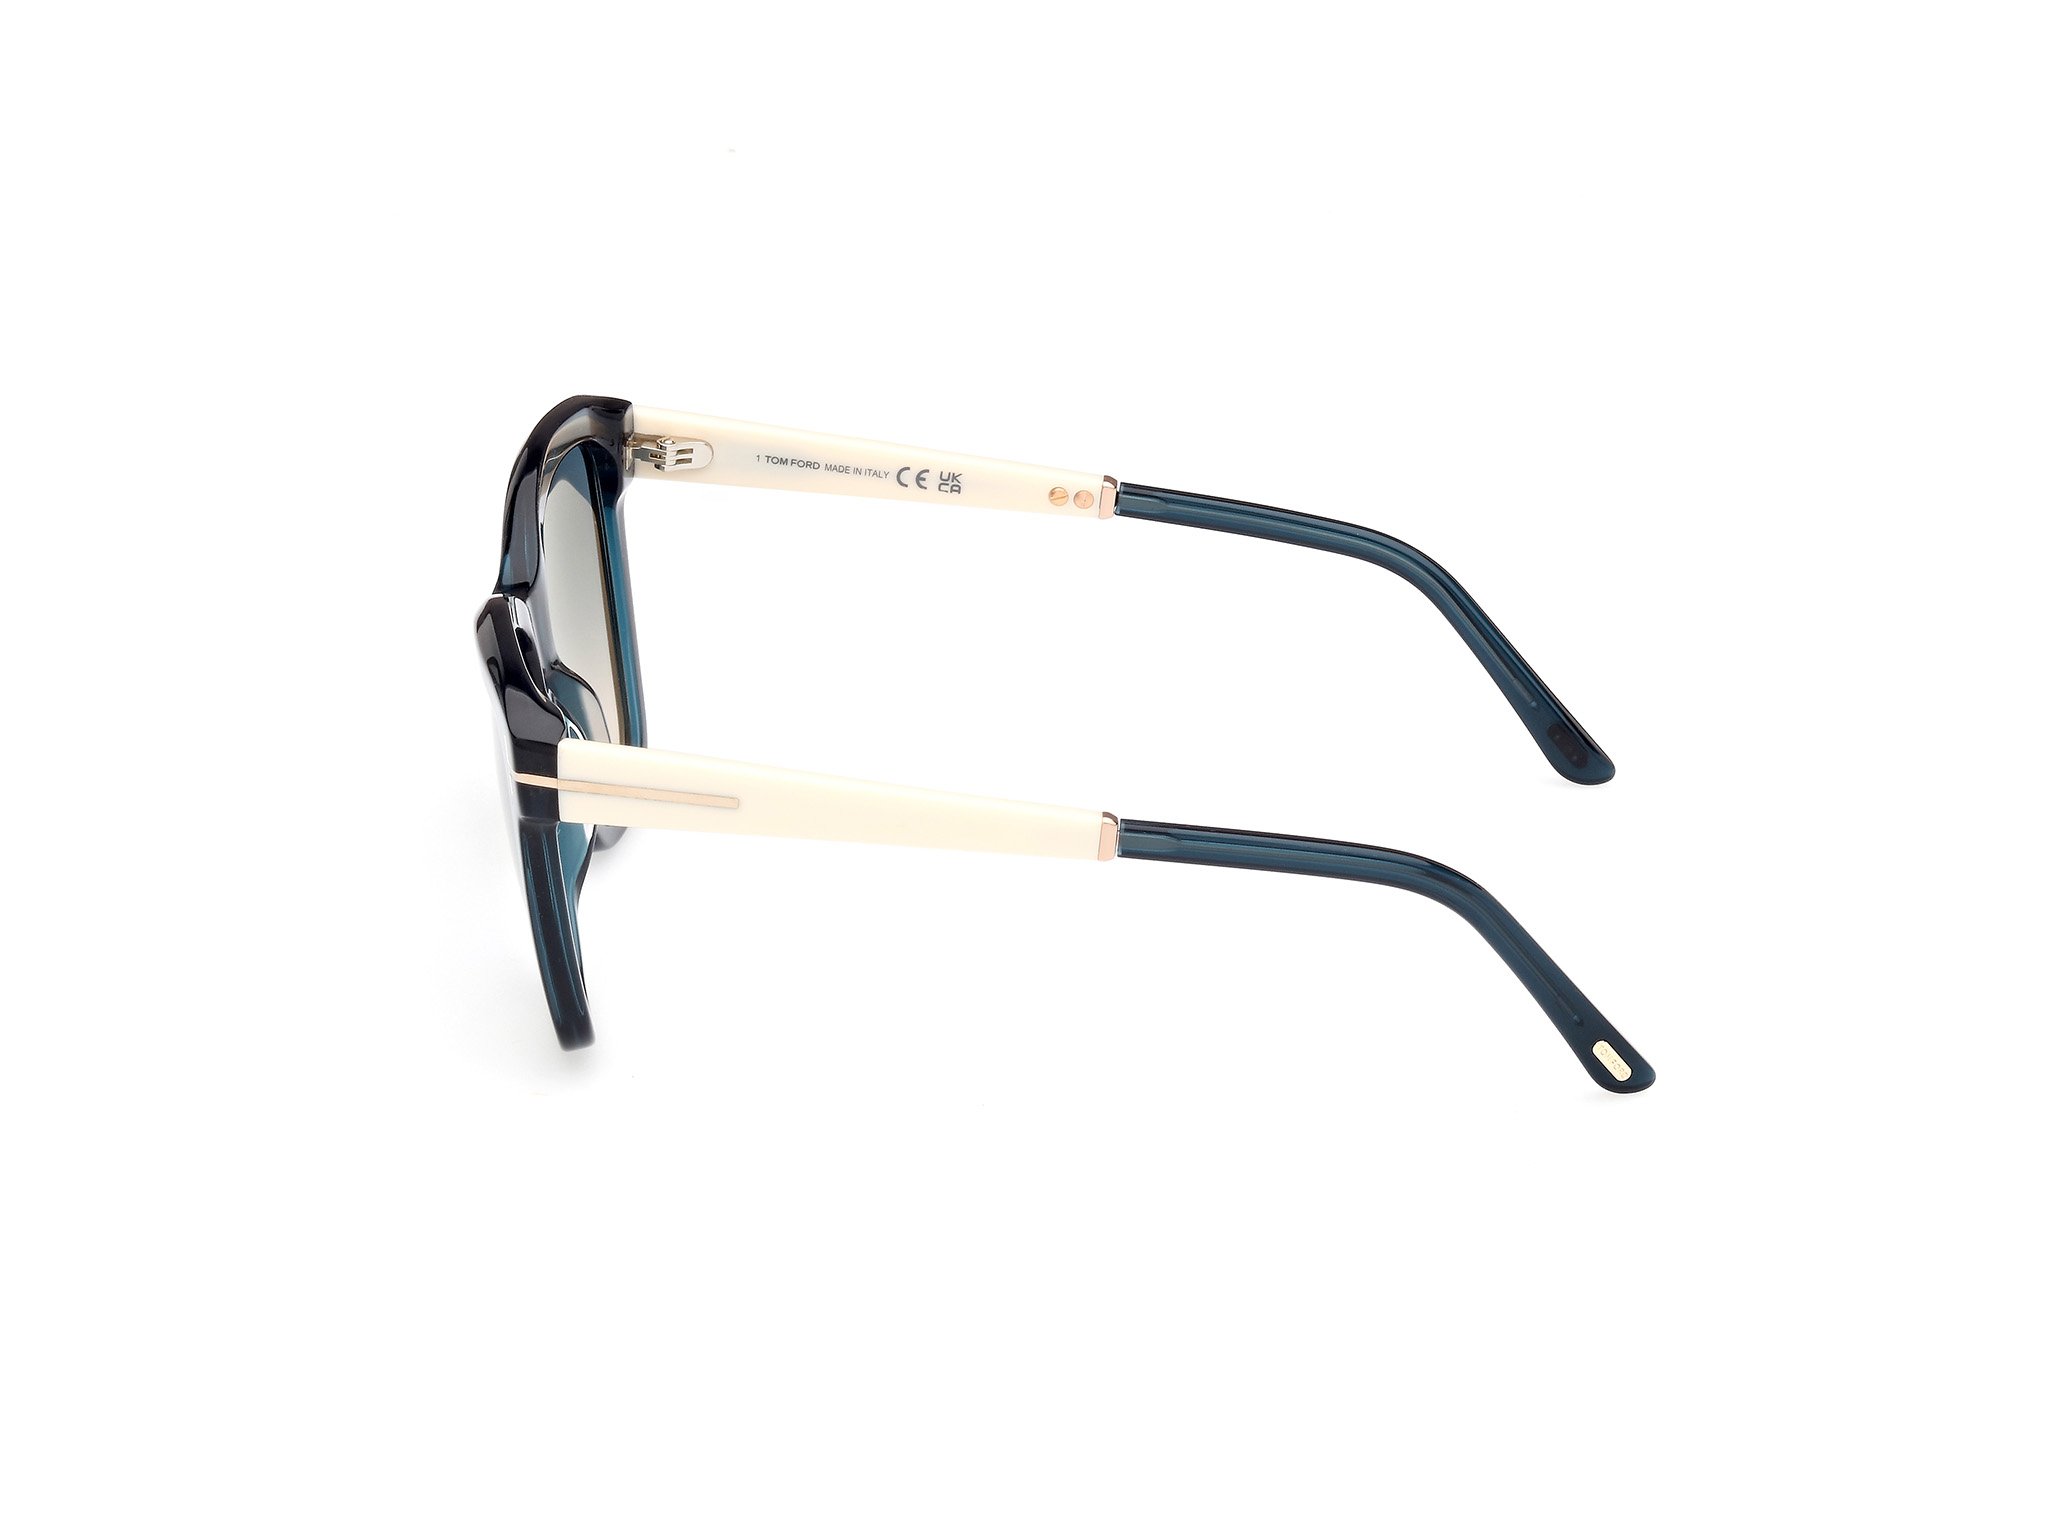  Tom Ford Sonnenbrille Lucia in blau FT1087 90P